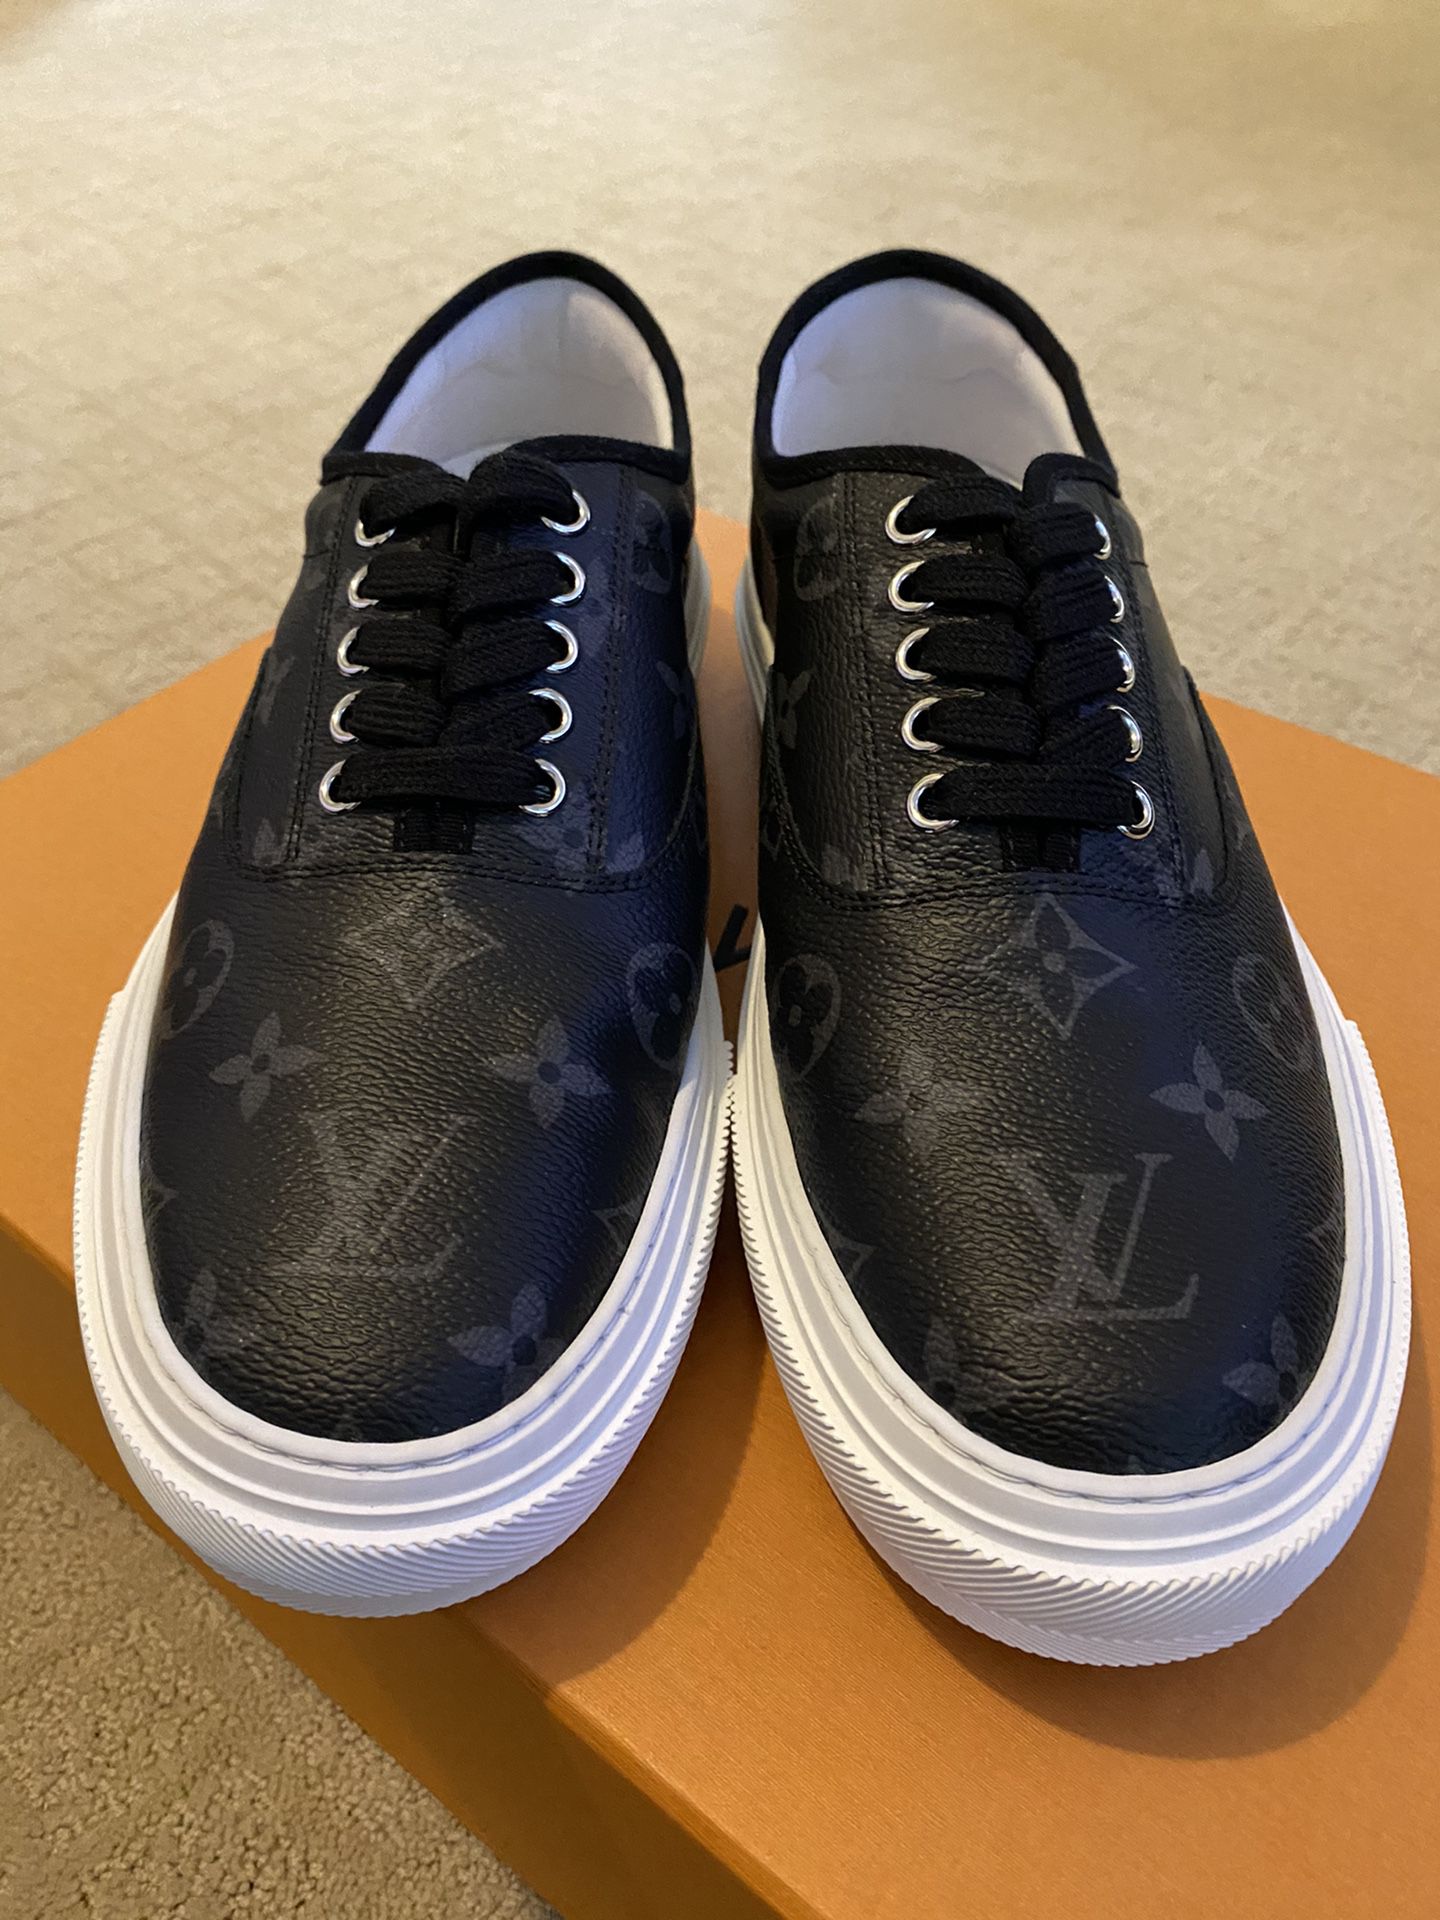 DS Louis Vuitton Trocadero sneakers for Sale in San Diego, CA - OfferUp